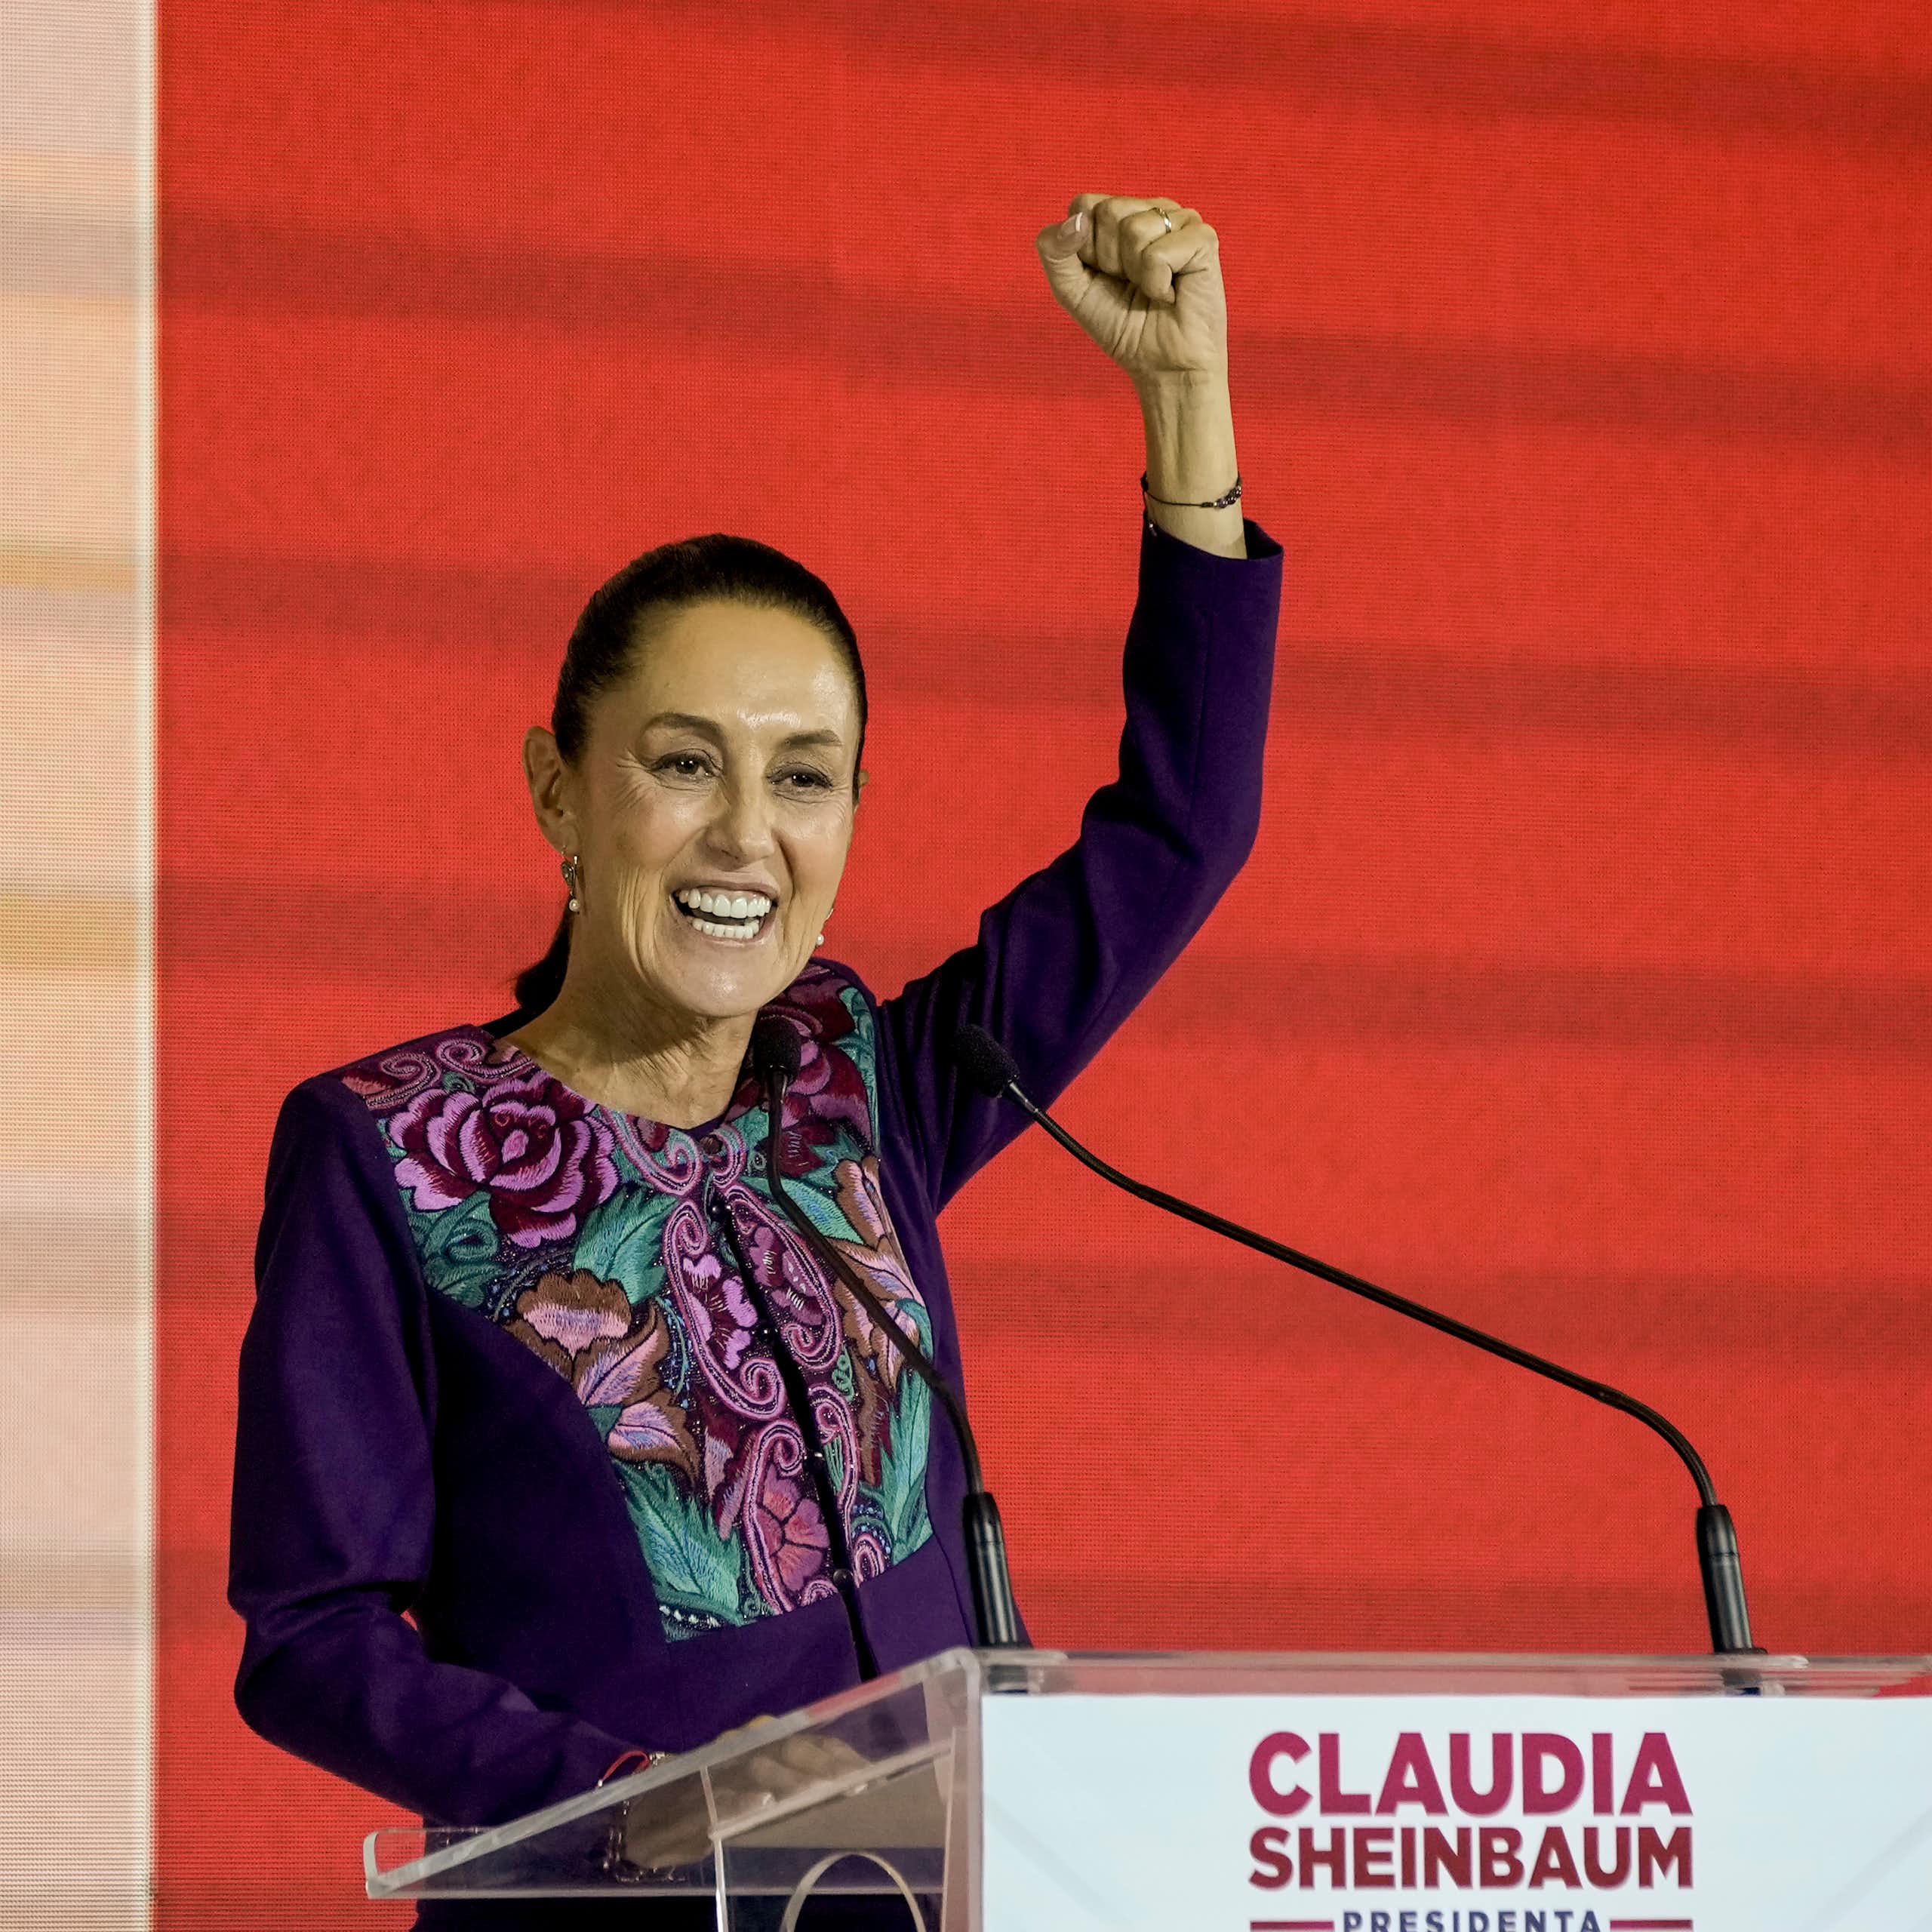 Mexico has elected its first female president. Claudia Sheinbaum inherits a polarised, violent country looking for hope